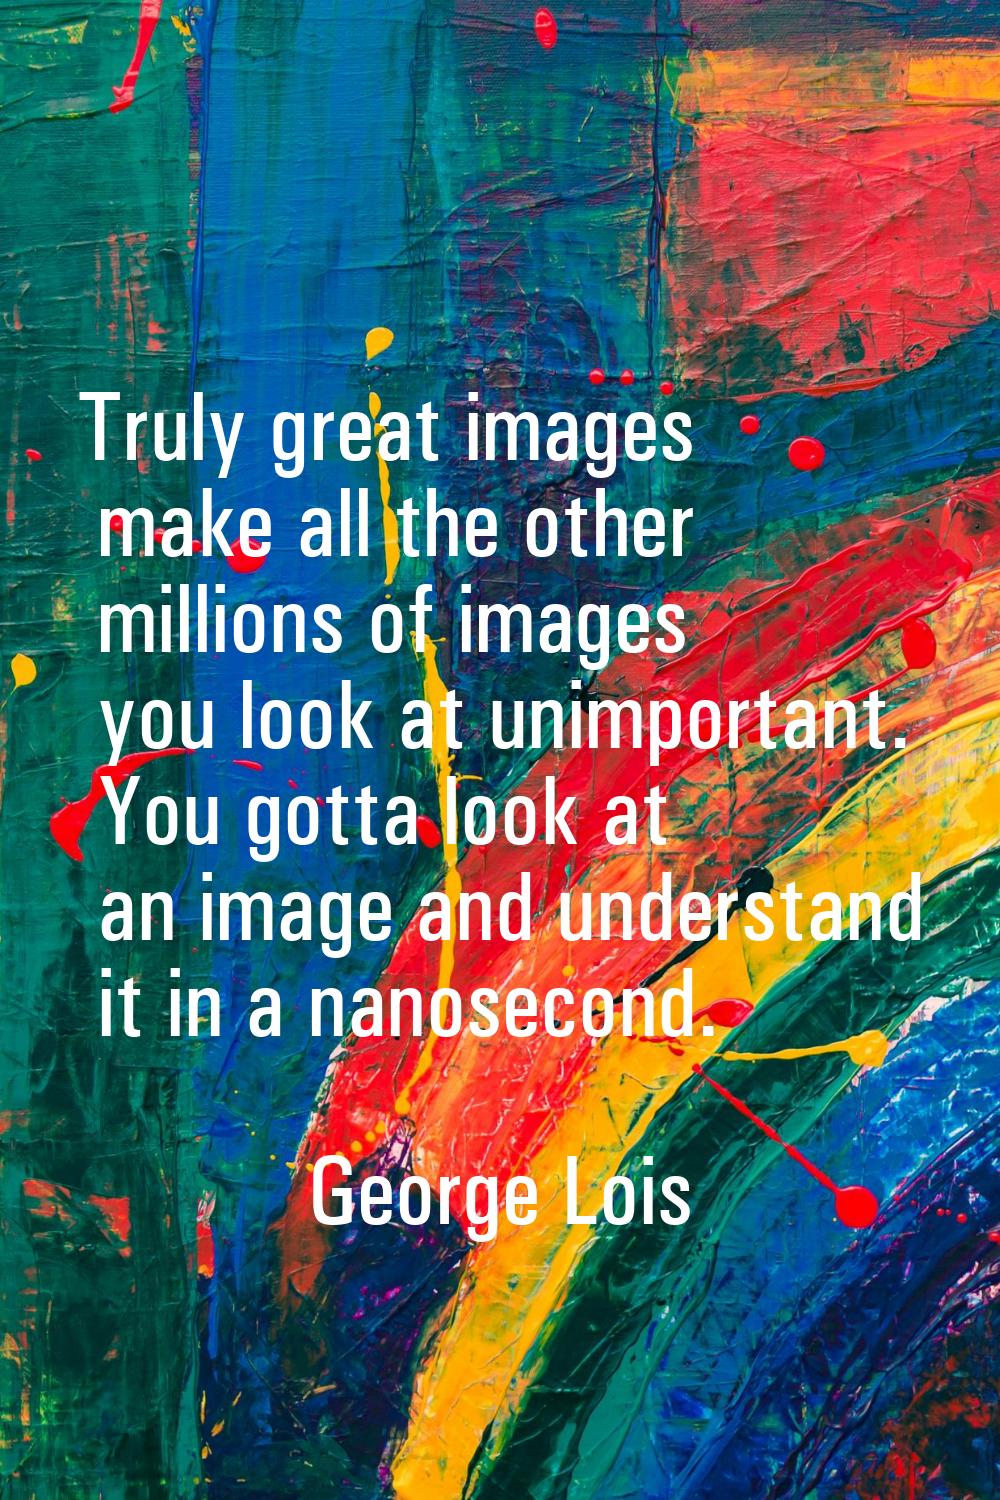 Truly great images make all the other millions of images you look at unimportant. You gotta look at